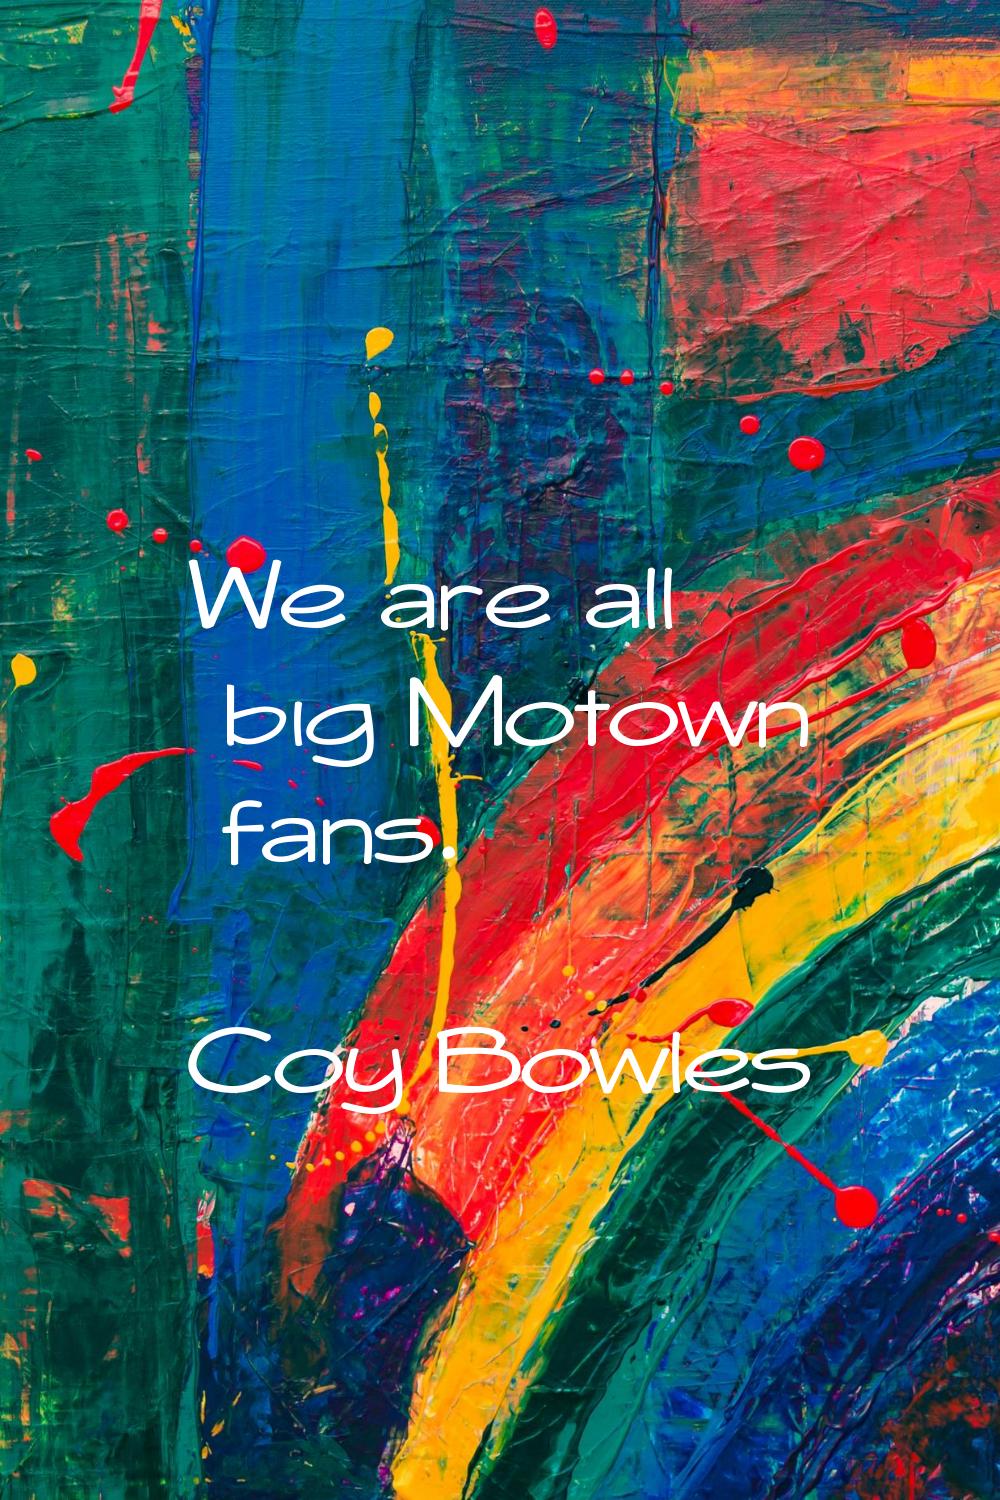 We are all big Motown fans.